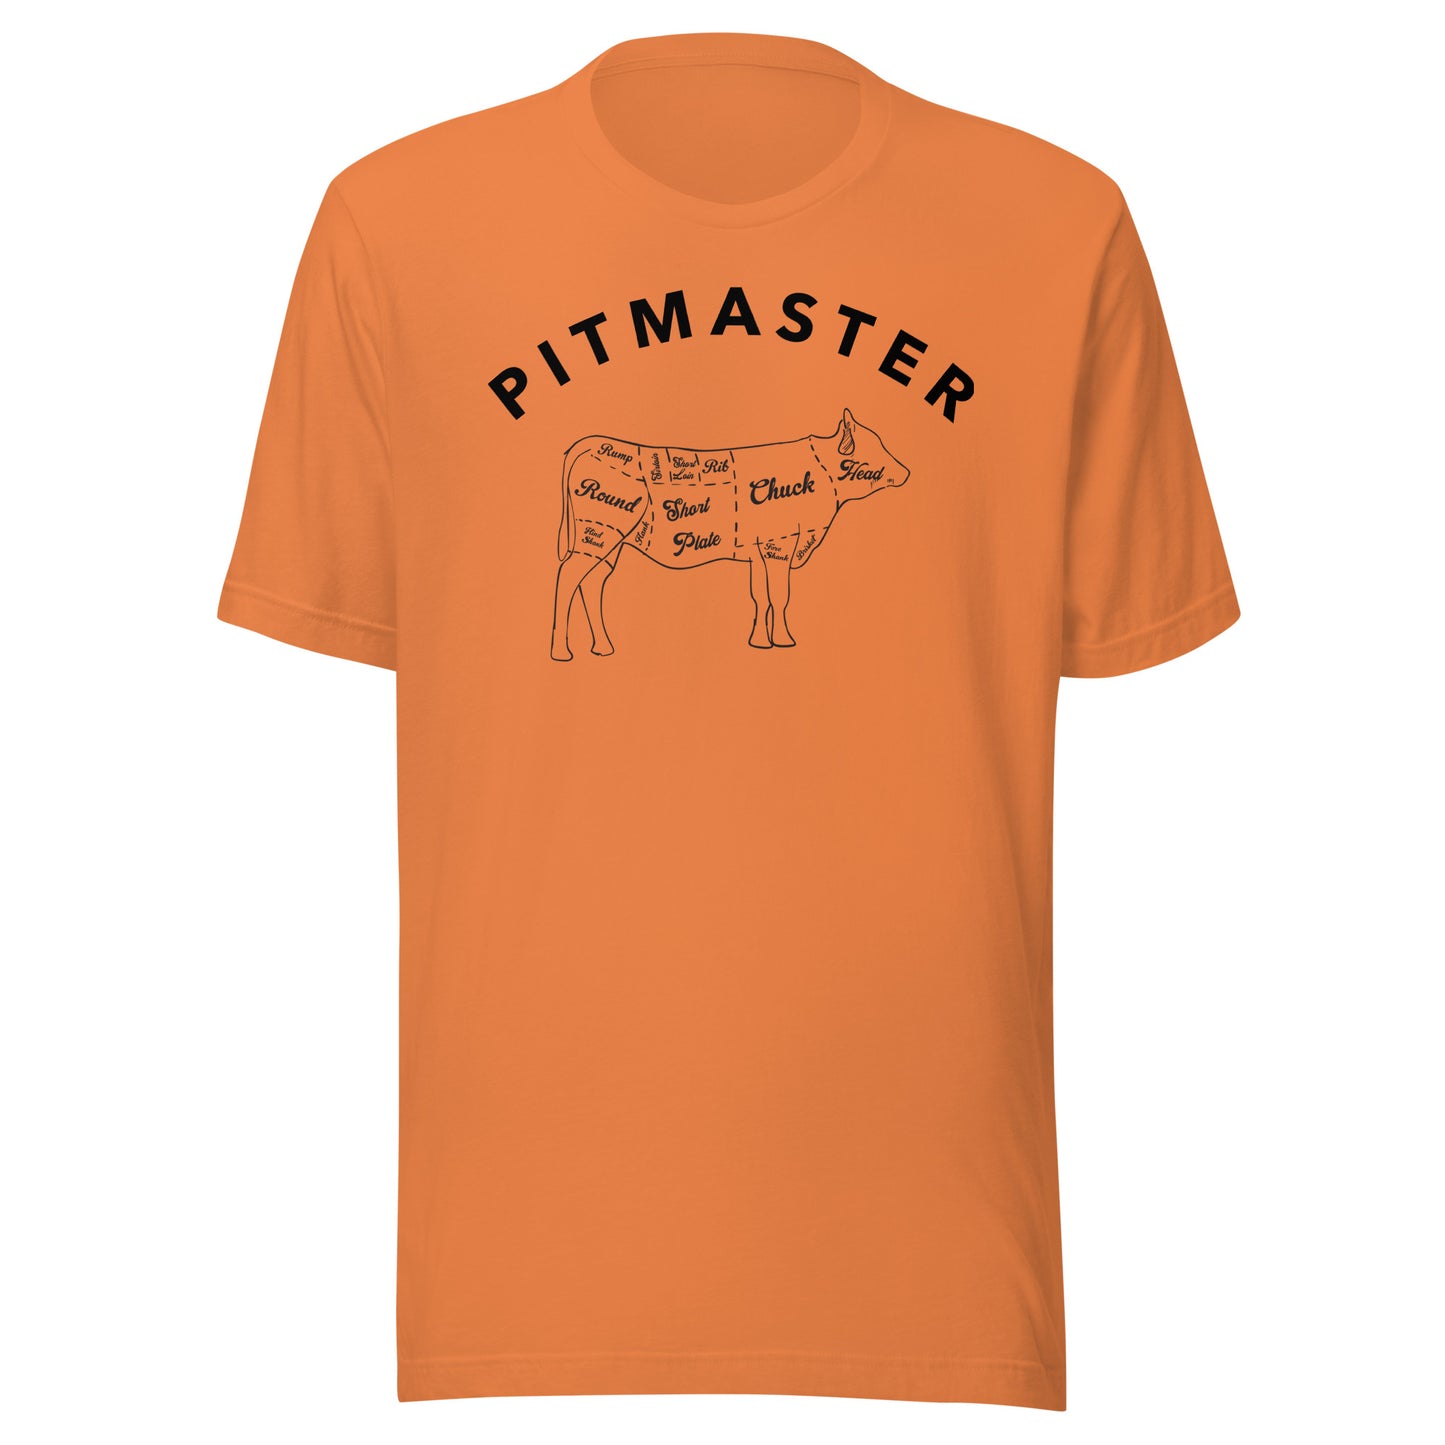 Pitmaster t-shirt - Beef edition